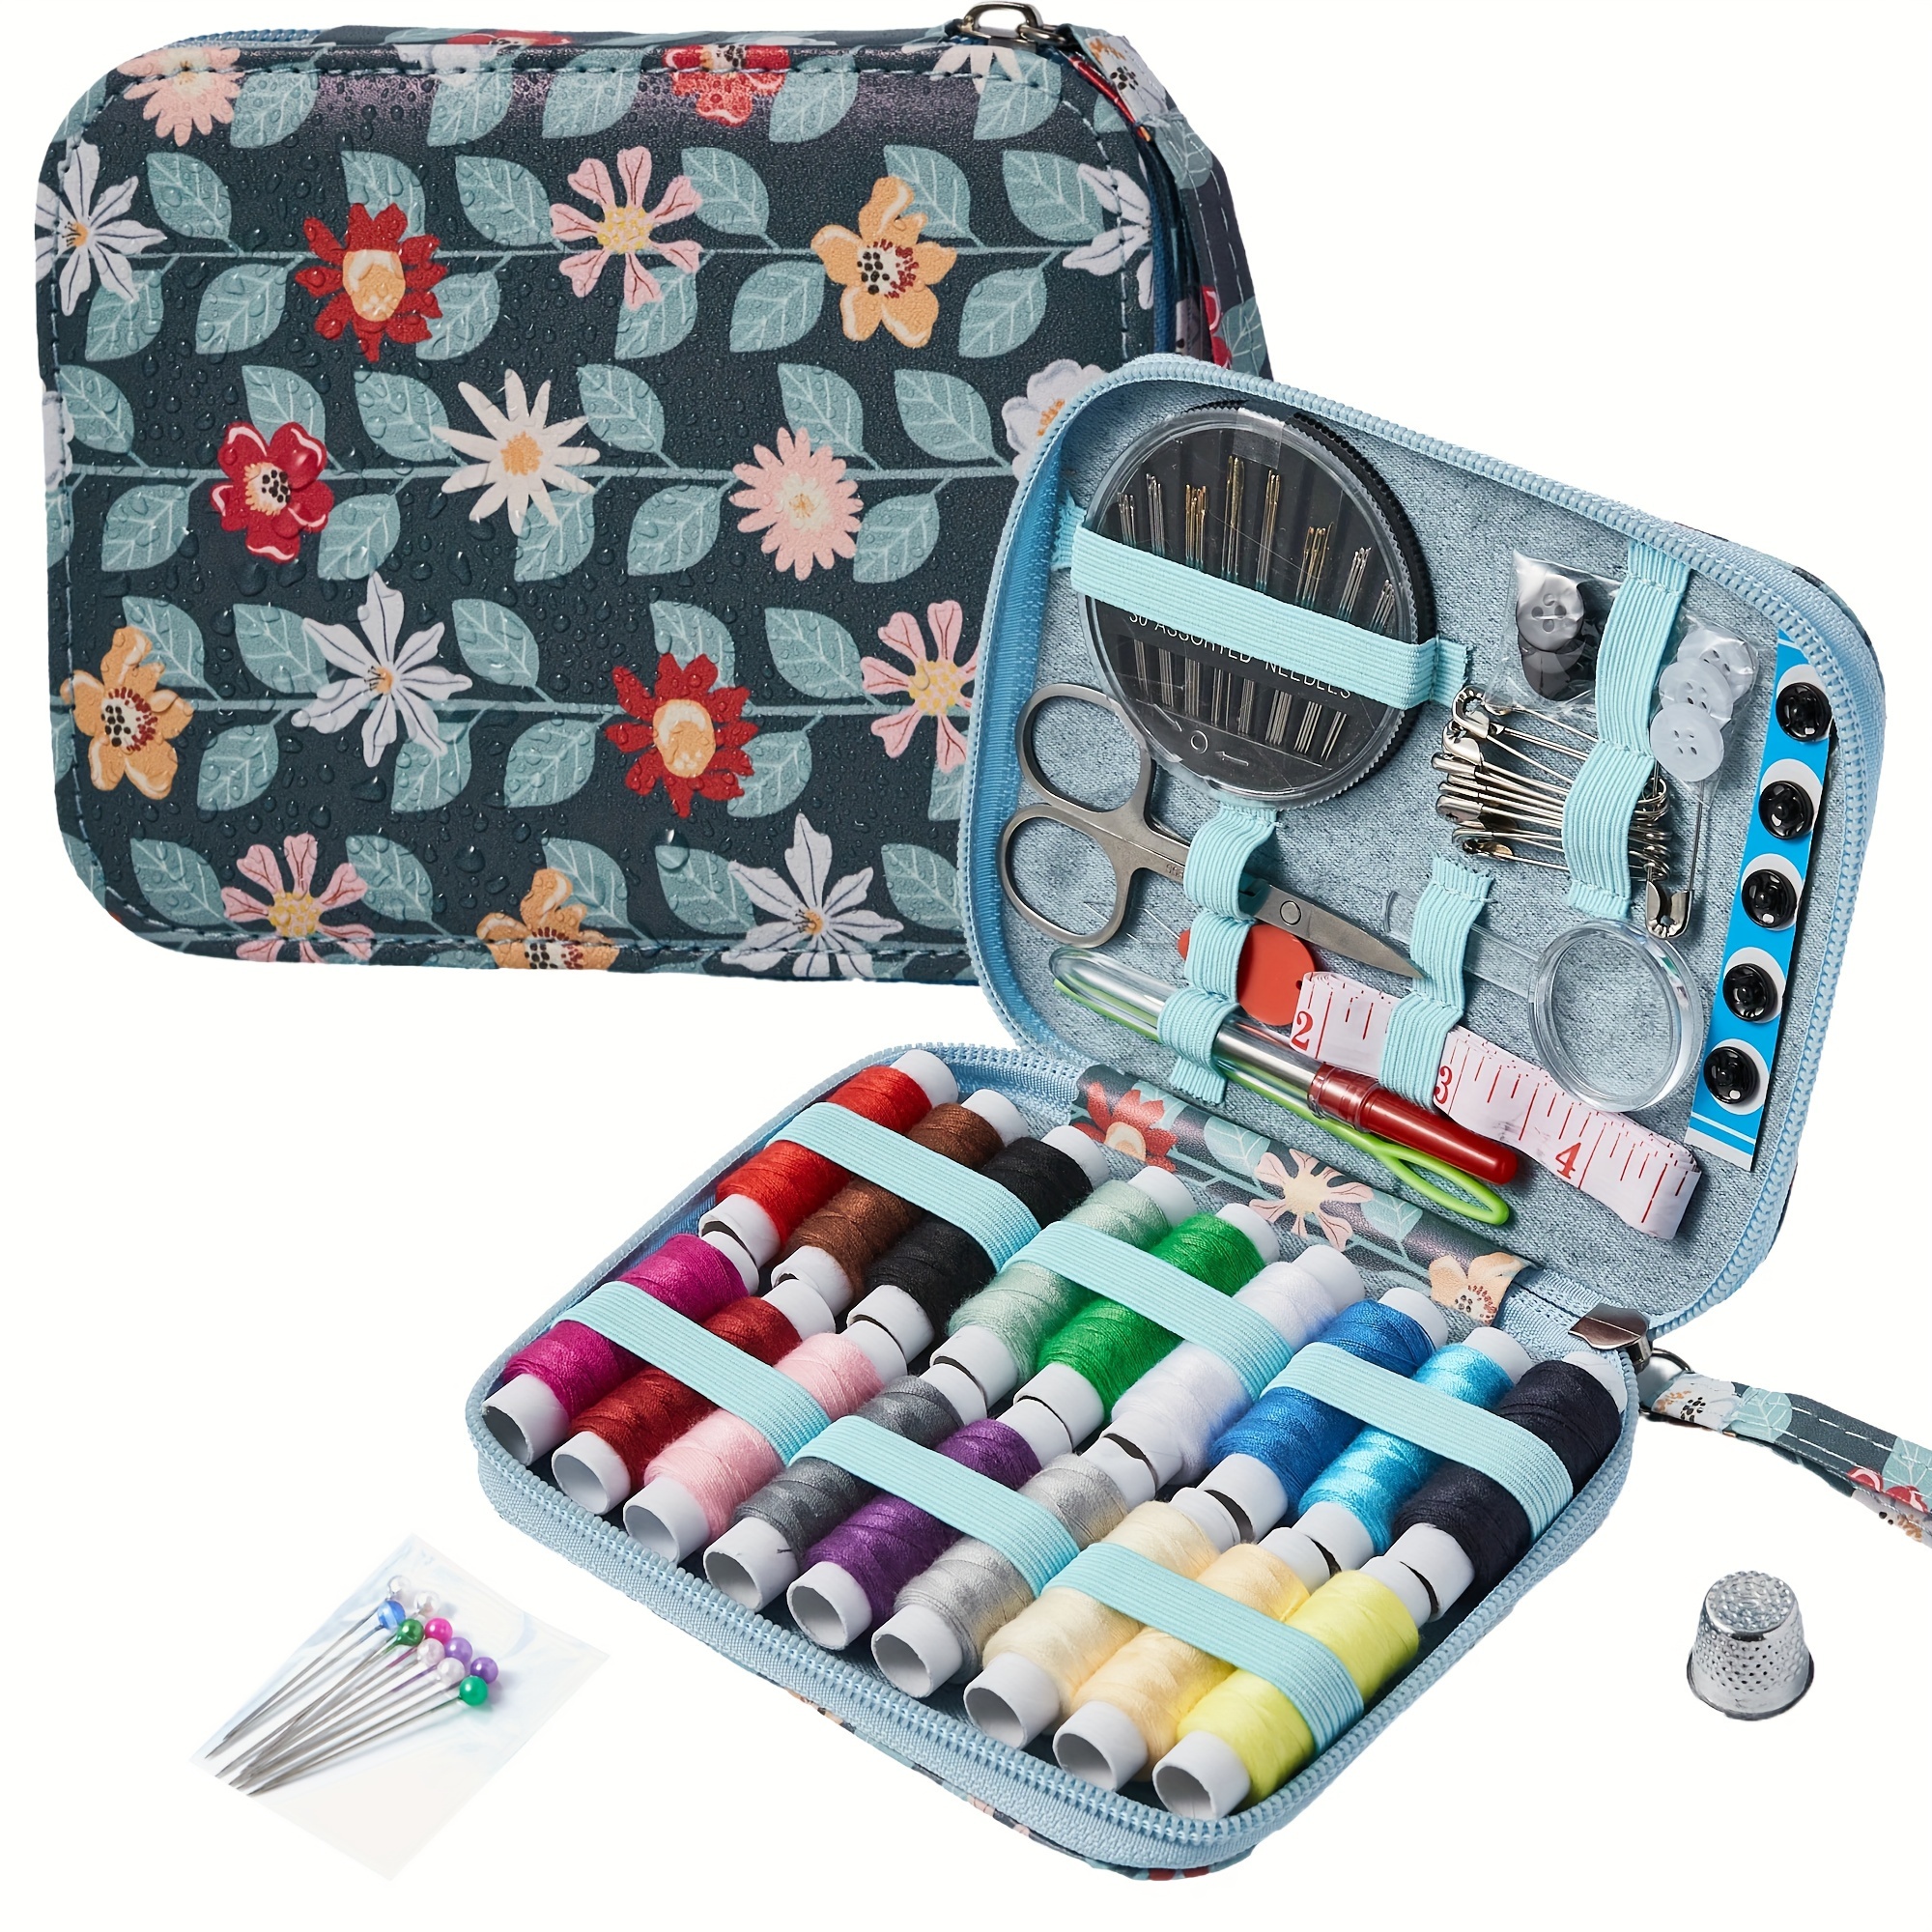 

sew Master" Complete 87-piece Sewing Kit For Adults - Includes Scissors, Tape Measure, Needle Threader & More - Perfect For Home, Travel & Emergency Repairs